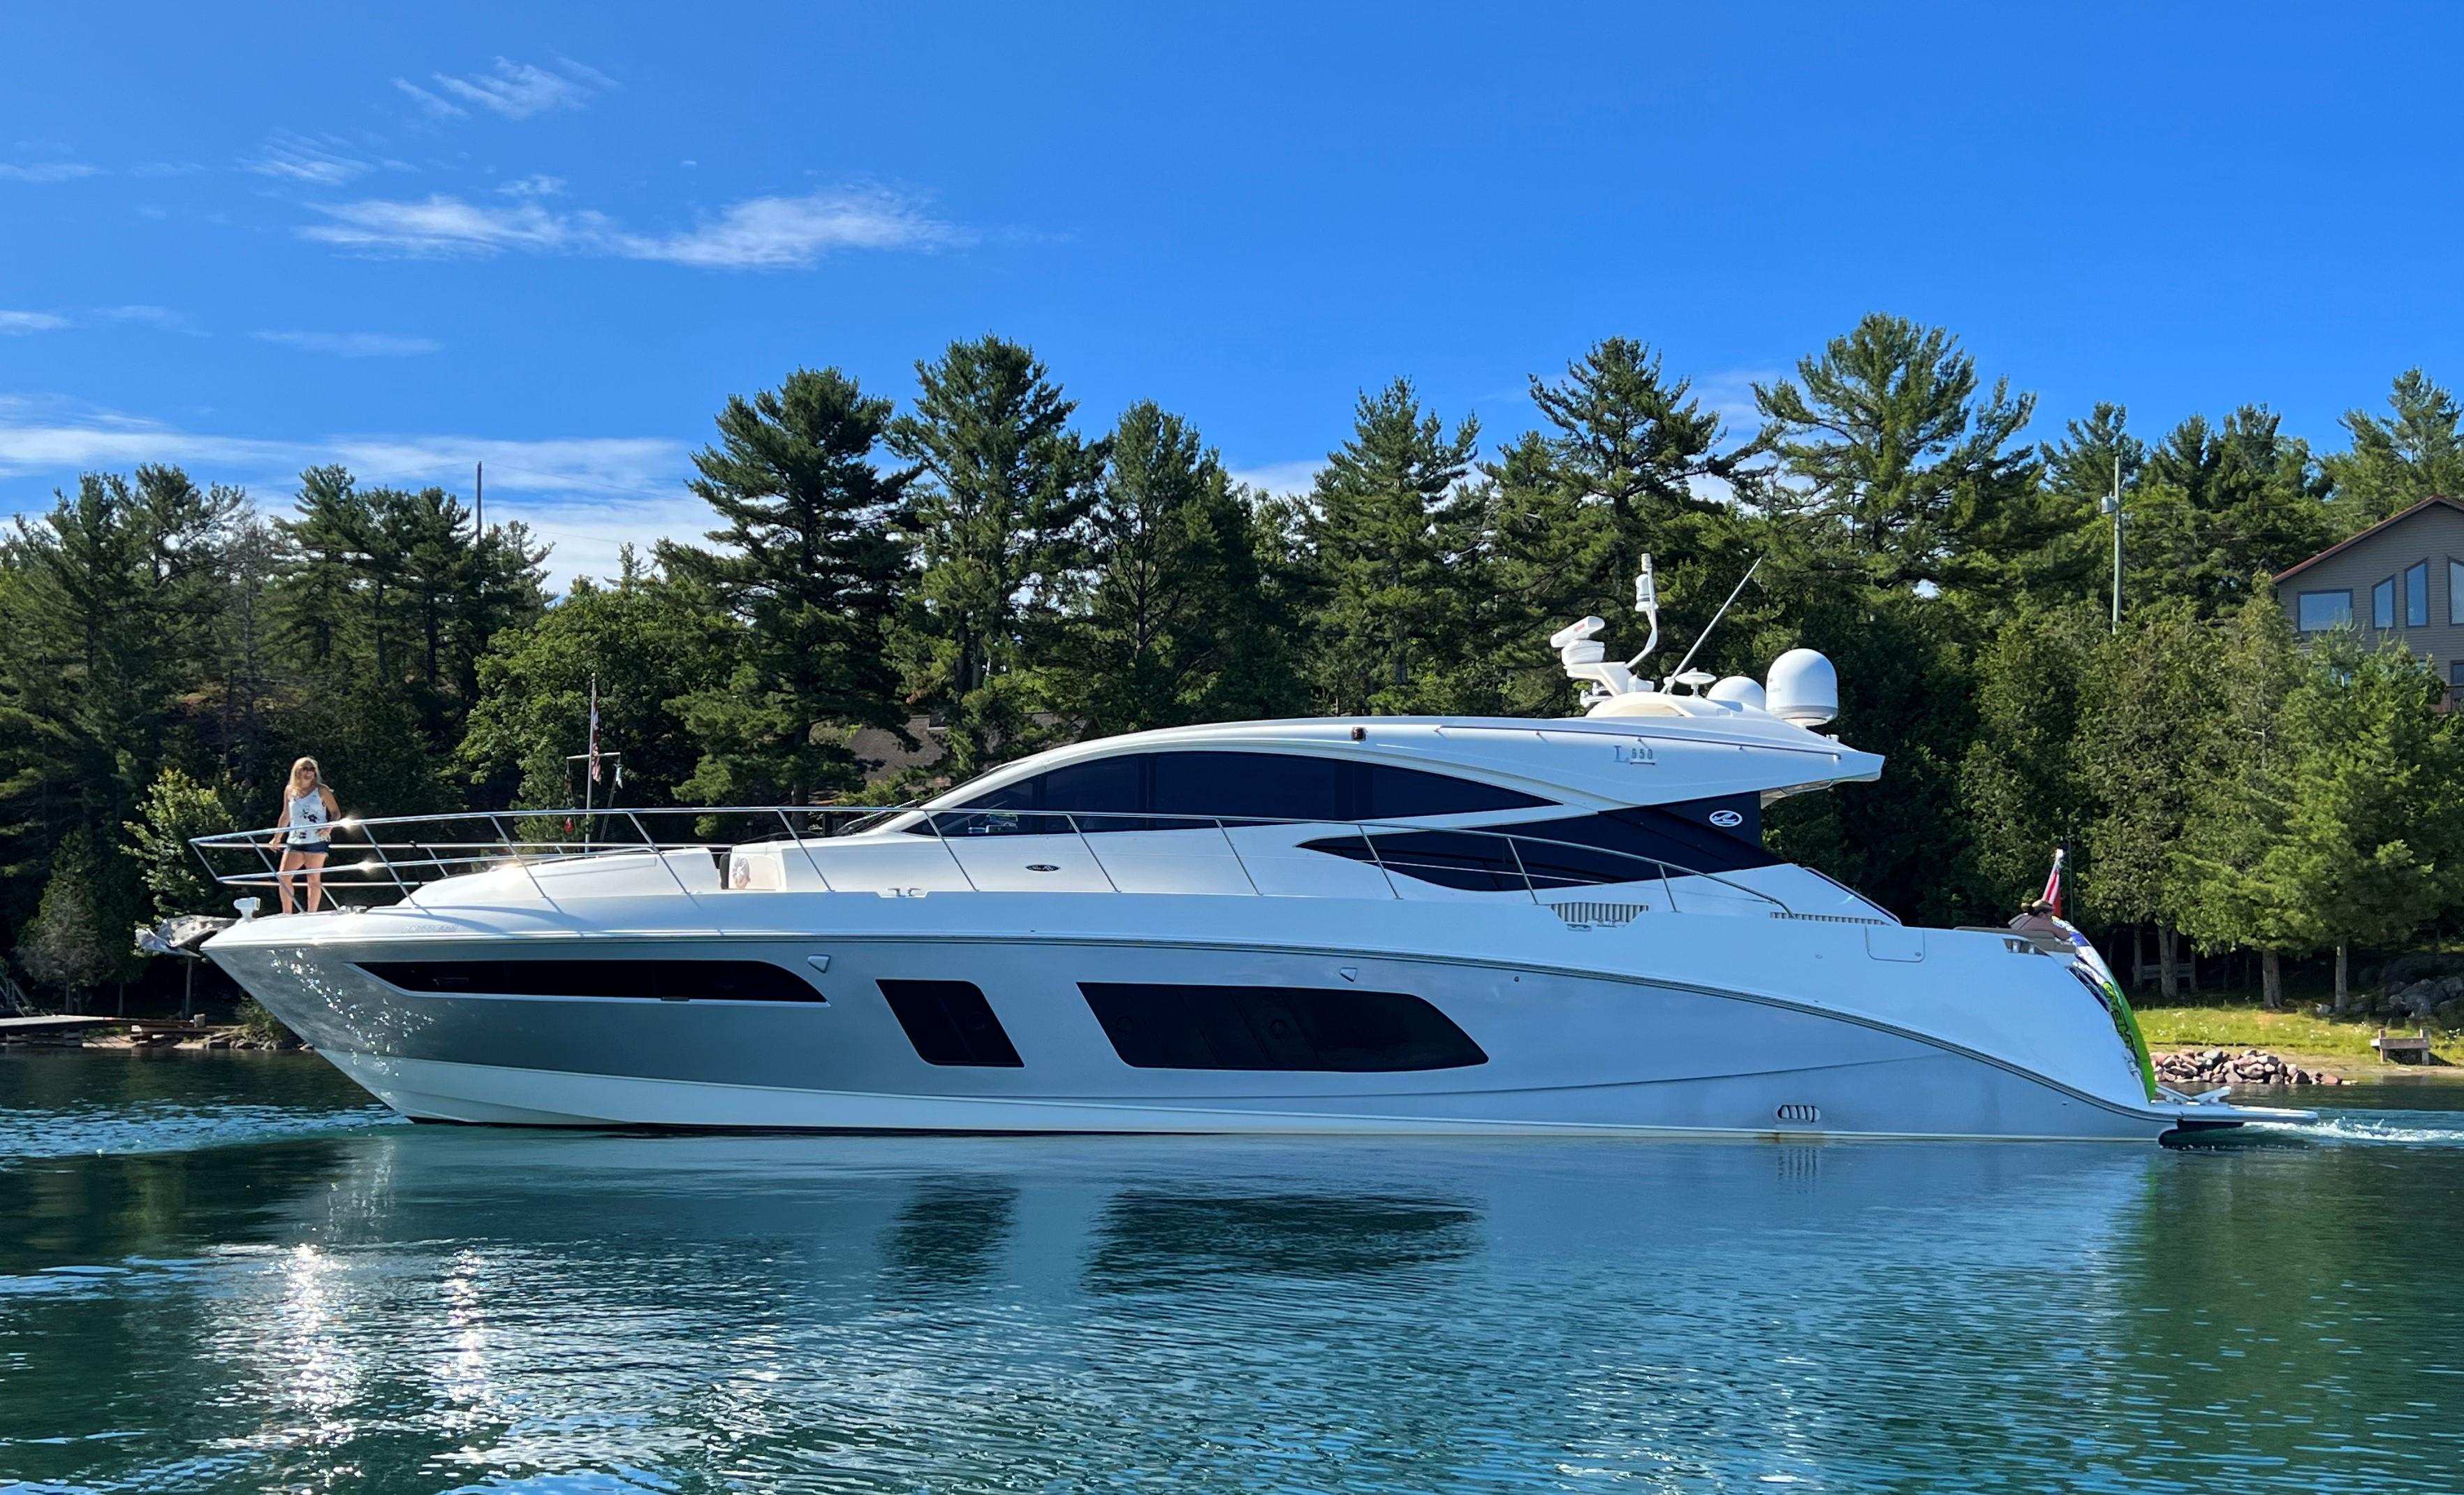 2017 Sea Ray L650 Motor Yacht for sale - YachtWorld